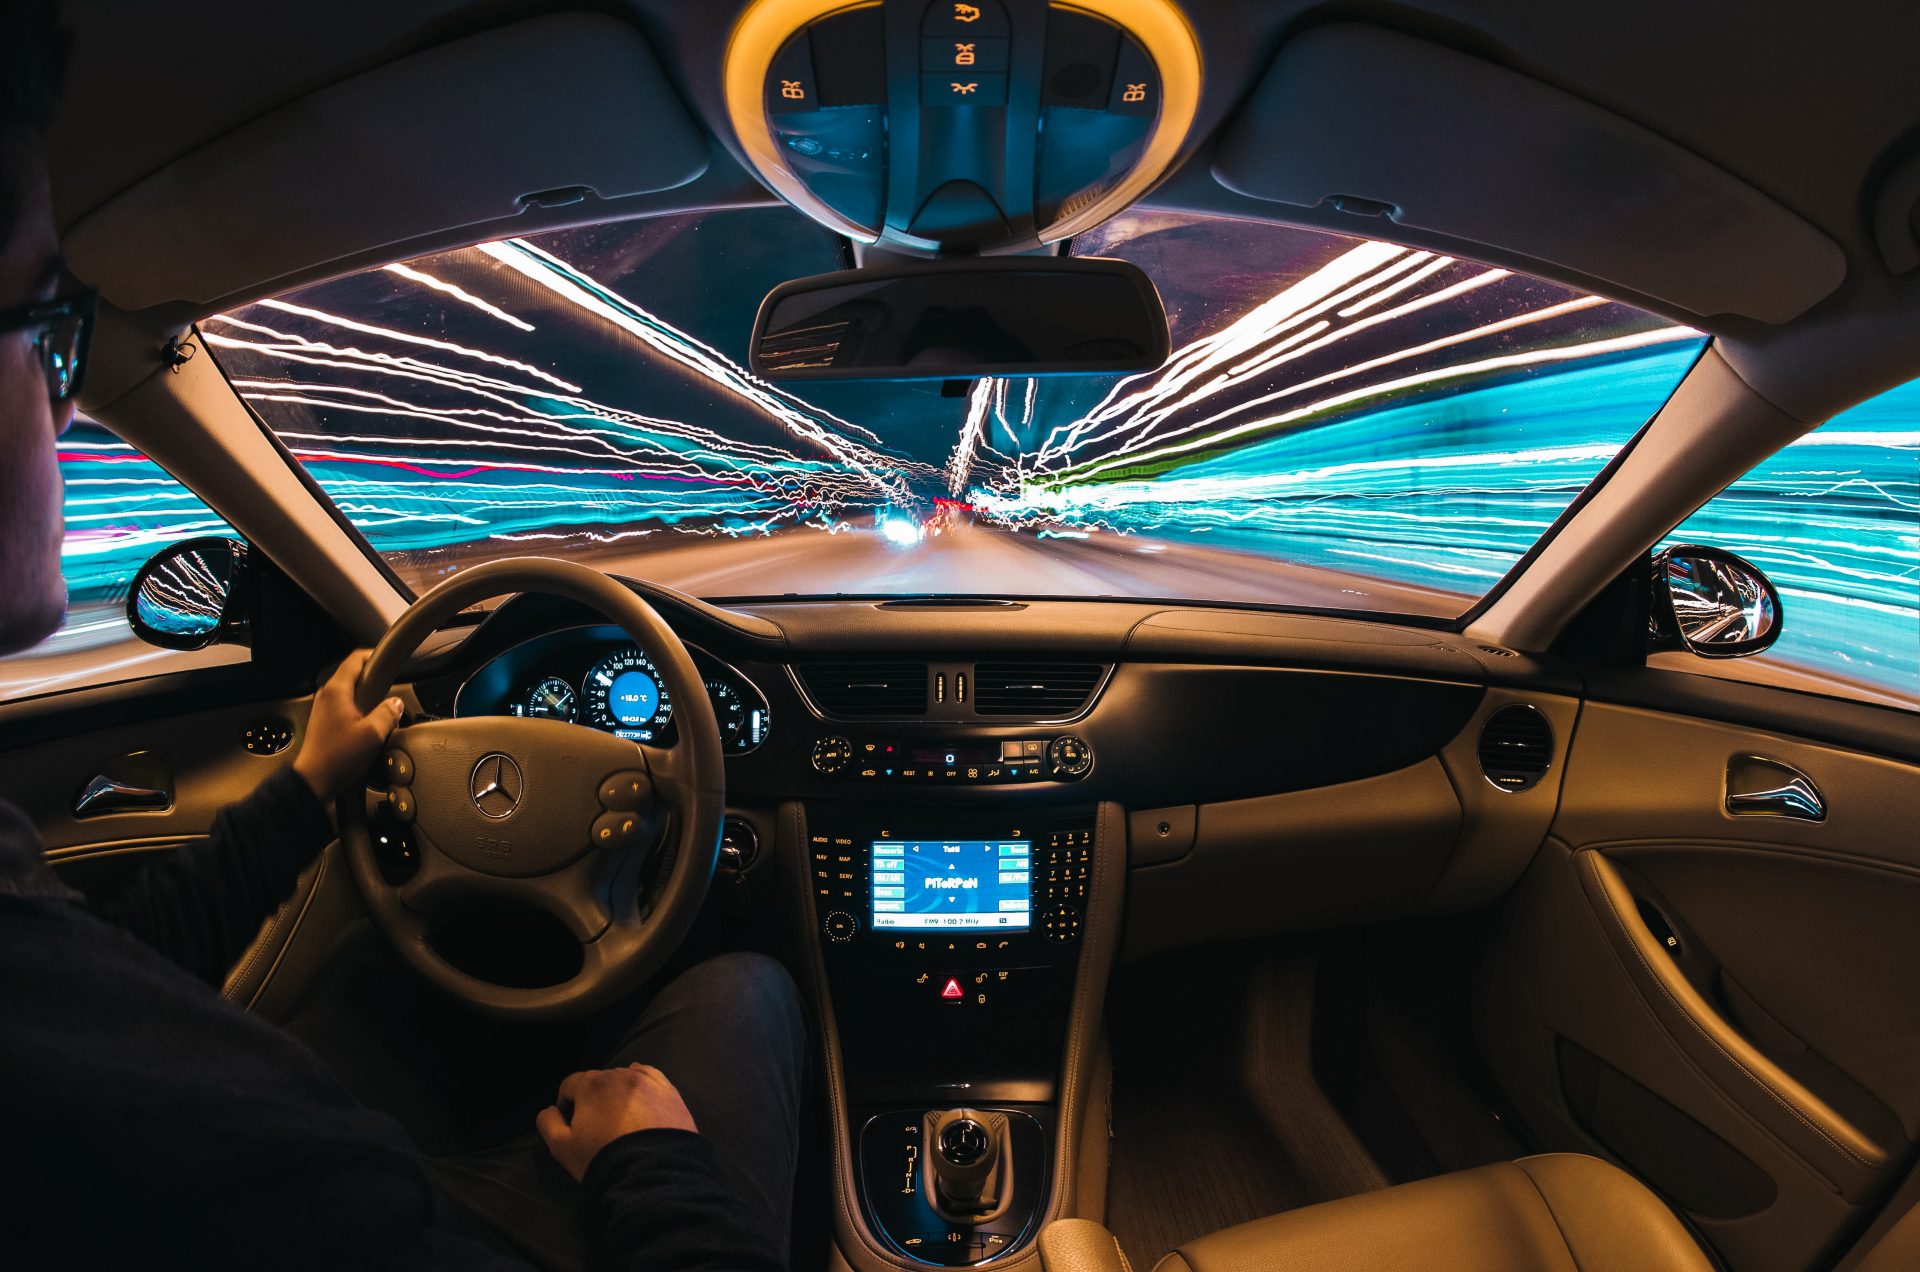 AI systems in cars